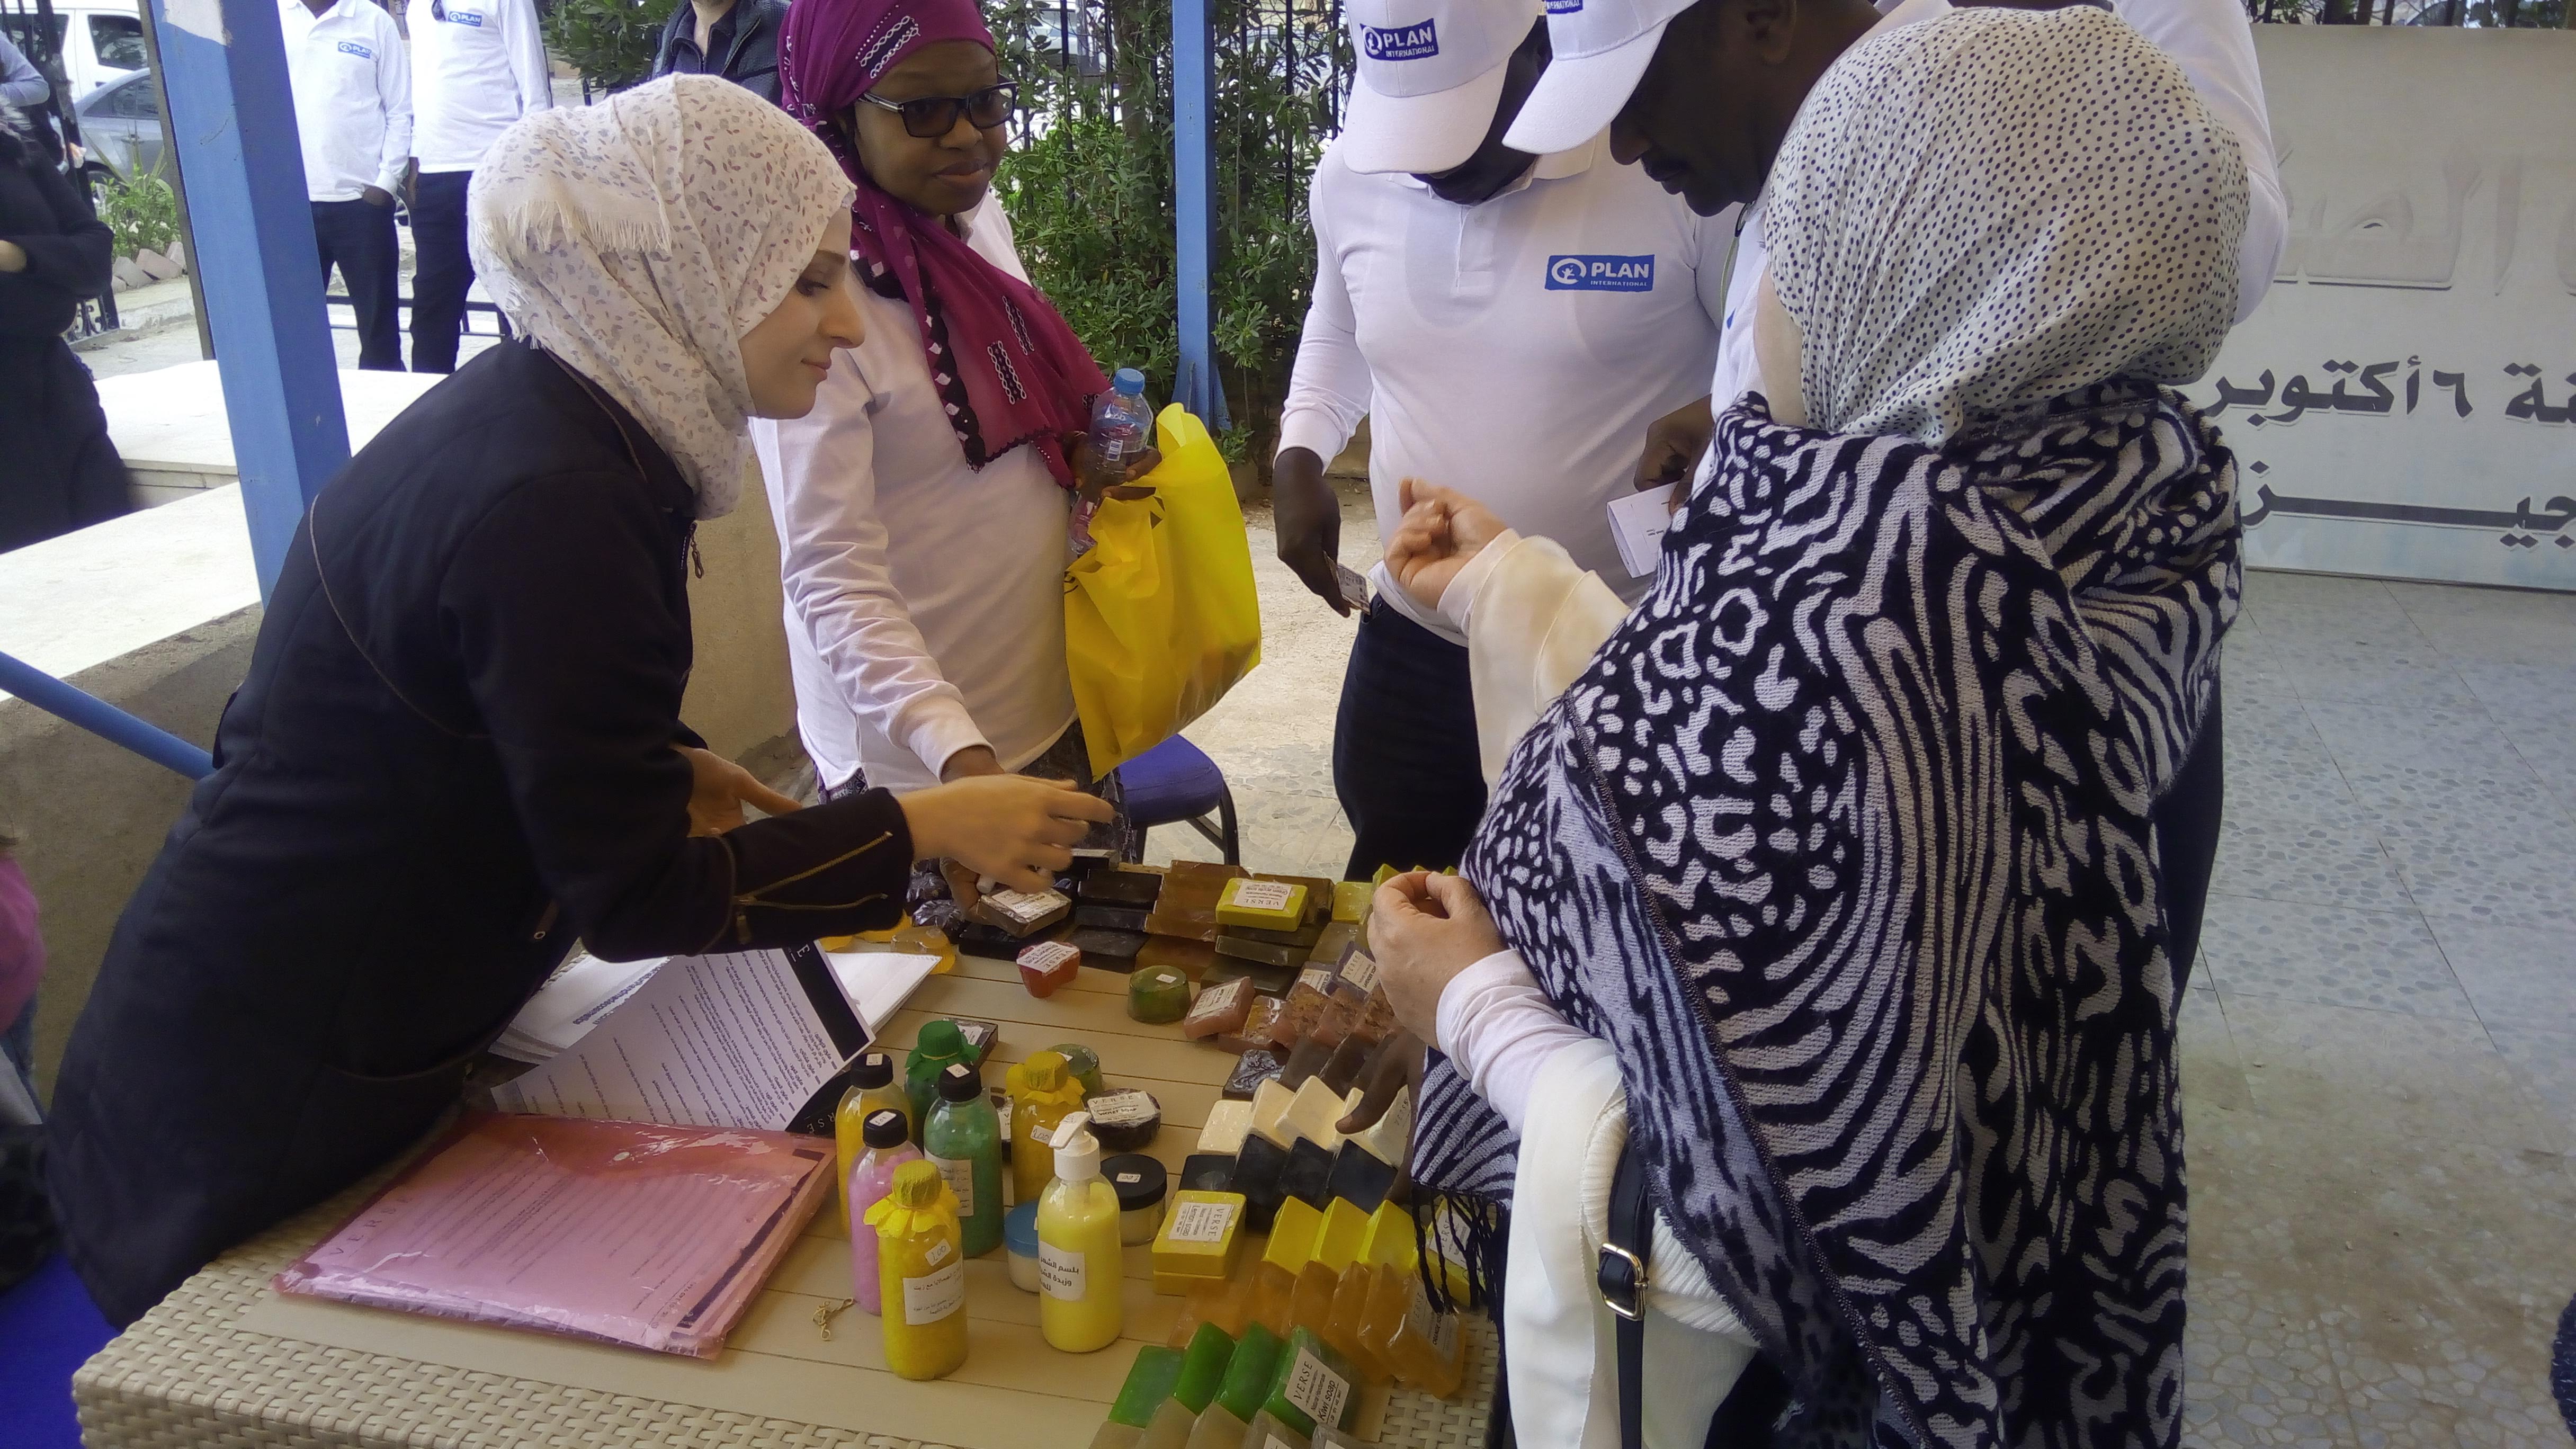 Women around a table selling soap.